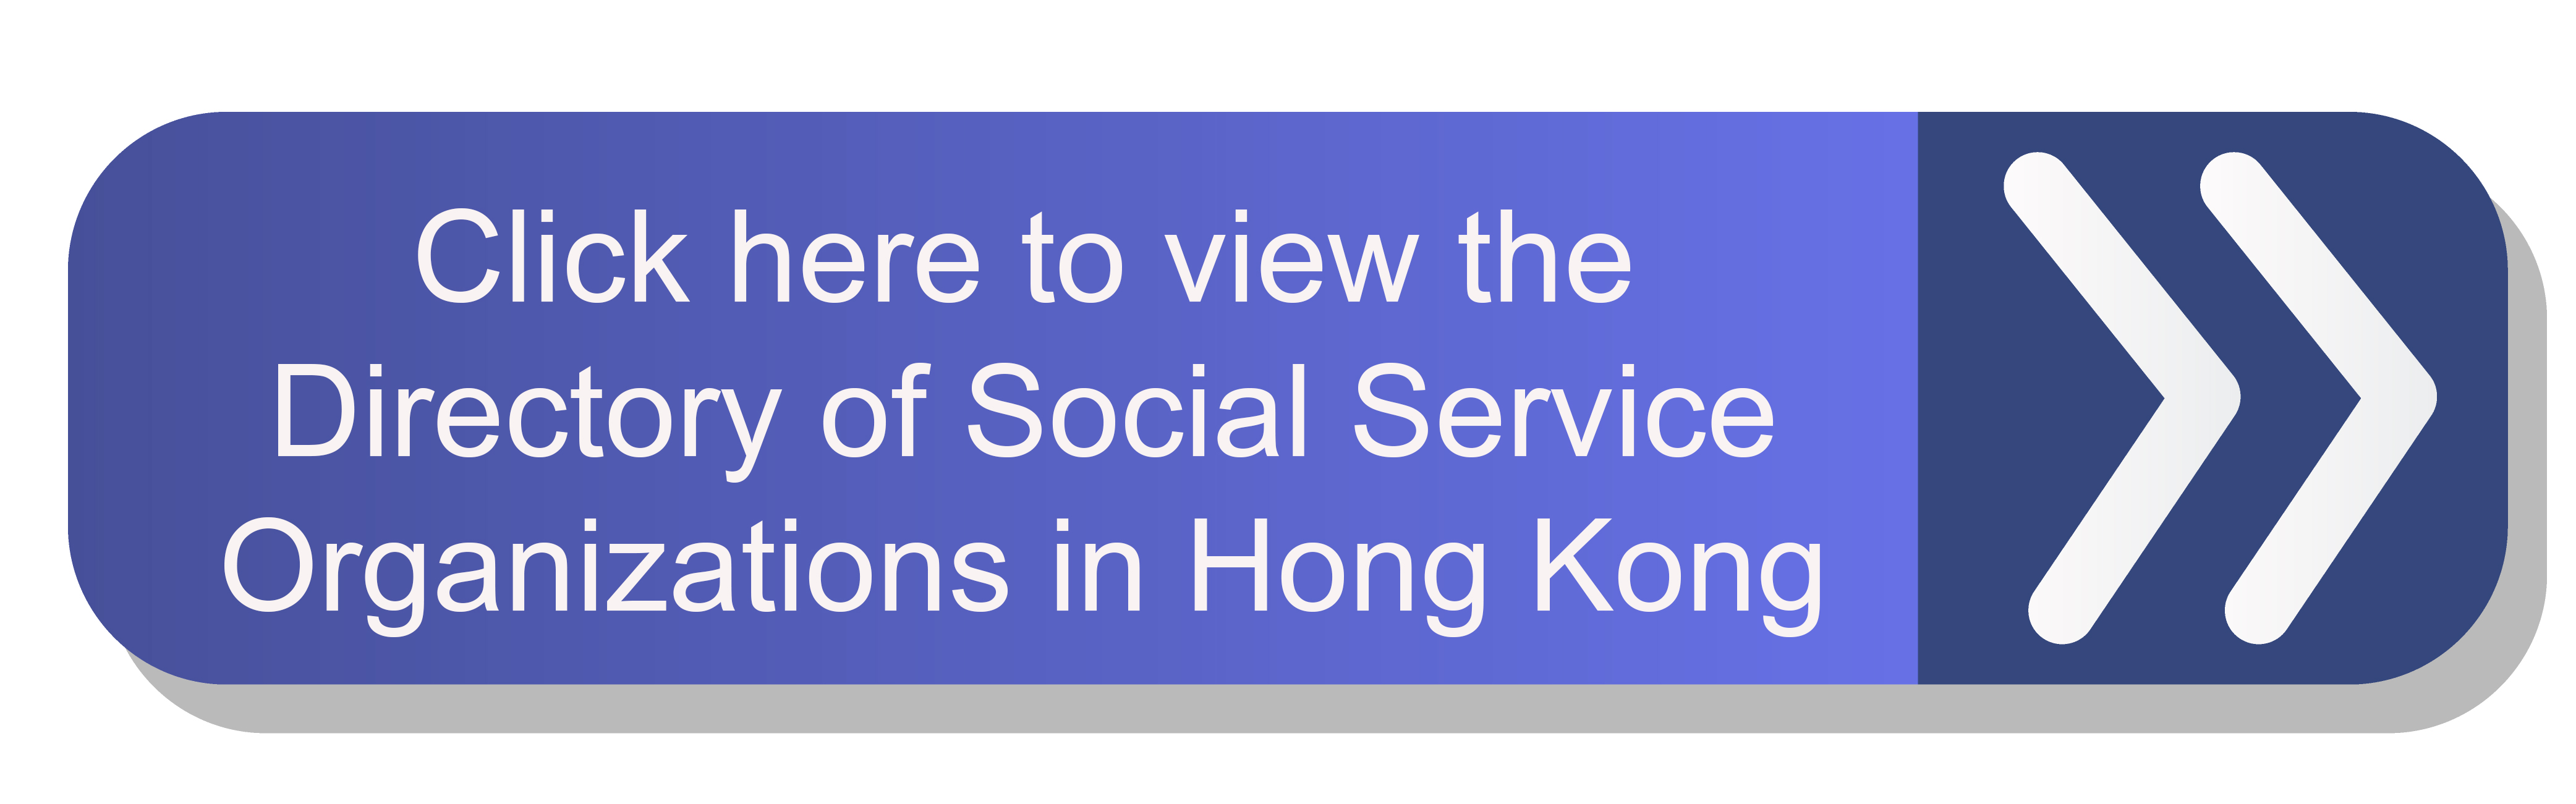 Click here to view the Directory of Social Service Organizations in Hong Kong